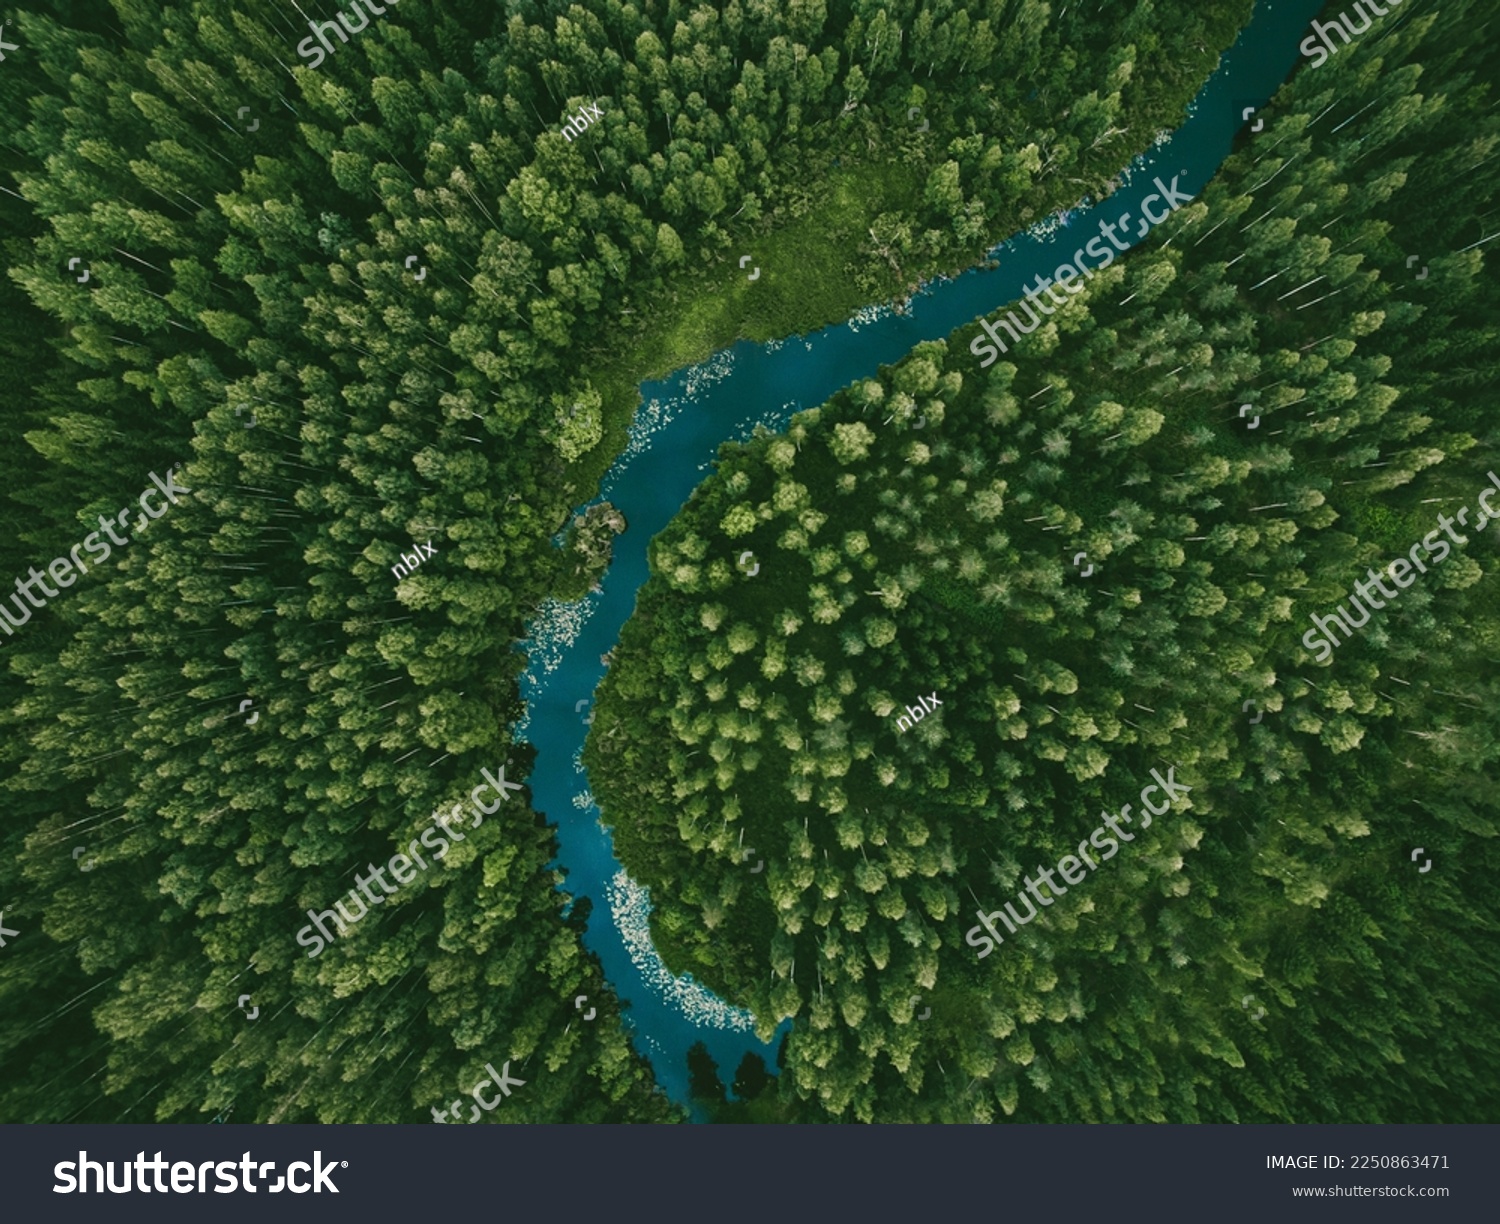 Aerial view of green grass forest with tall pine trees and blue bendy river flowing through the forest in Finland #2250863471